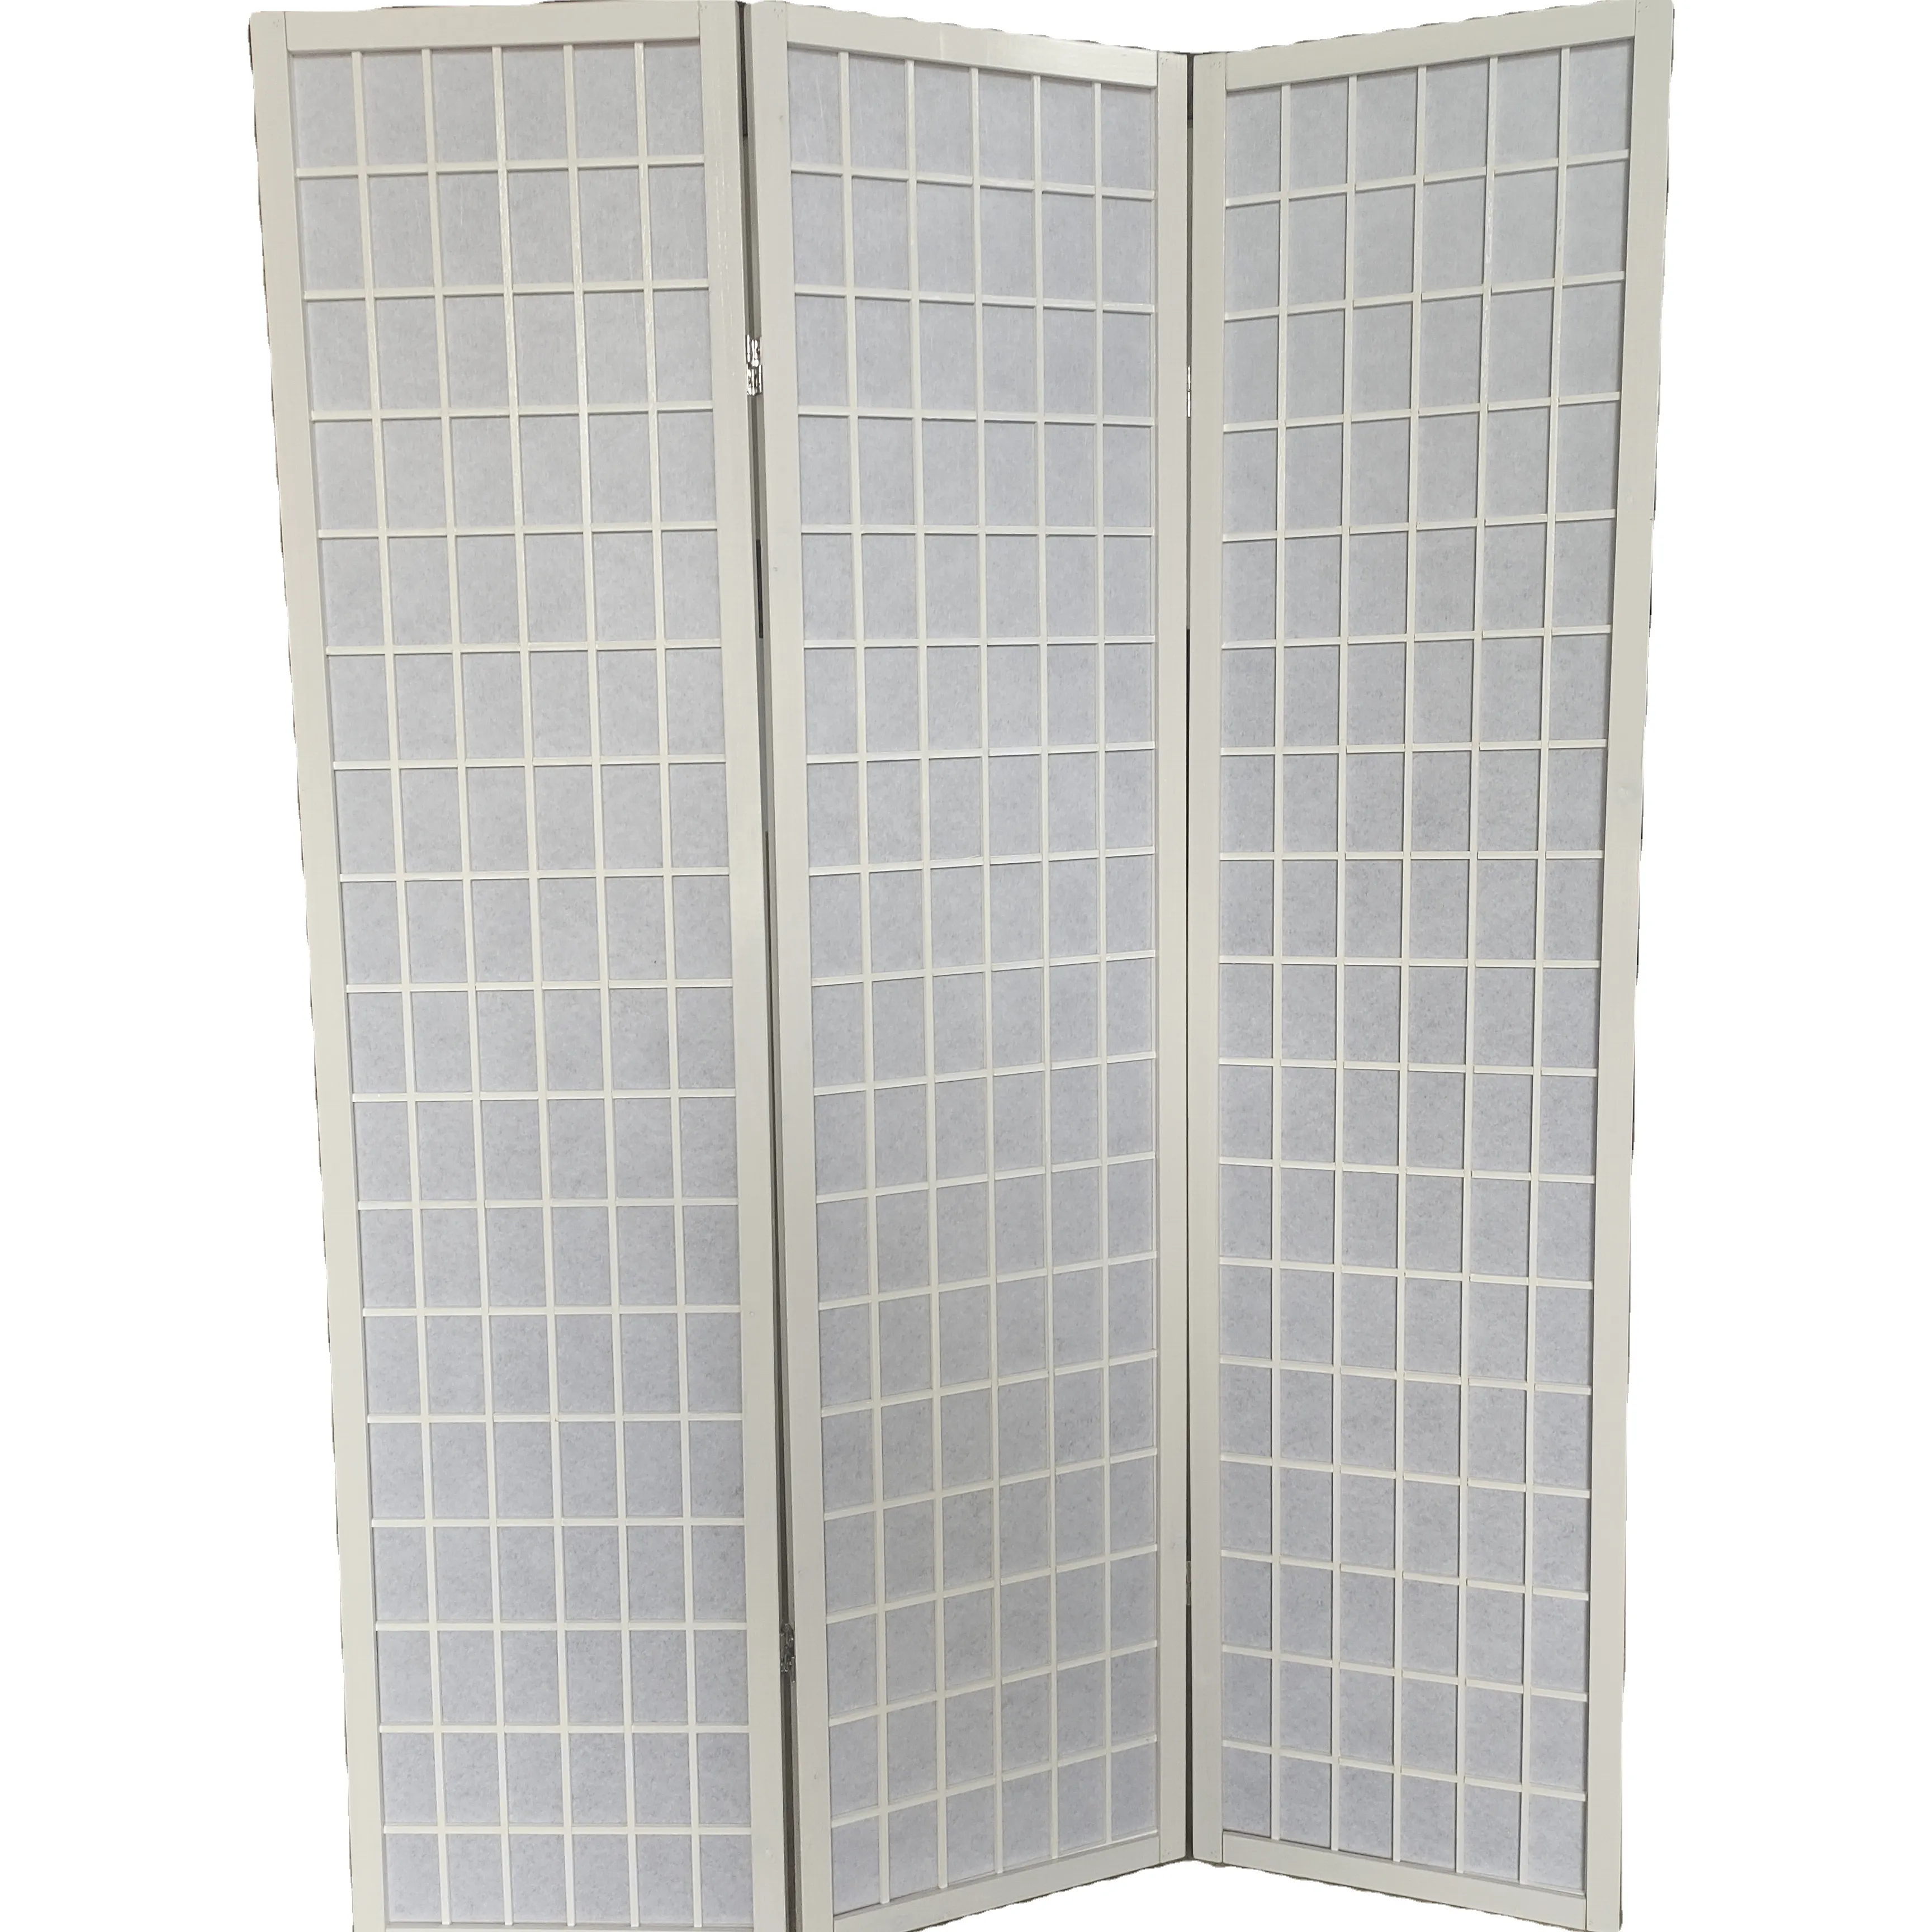 Wooden Decorative Screen Room Divider Movable Partition Wall hand made Floor Screen